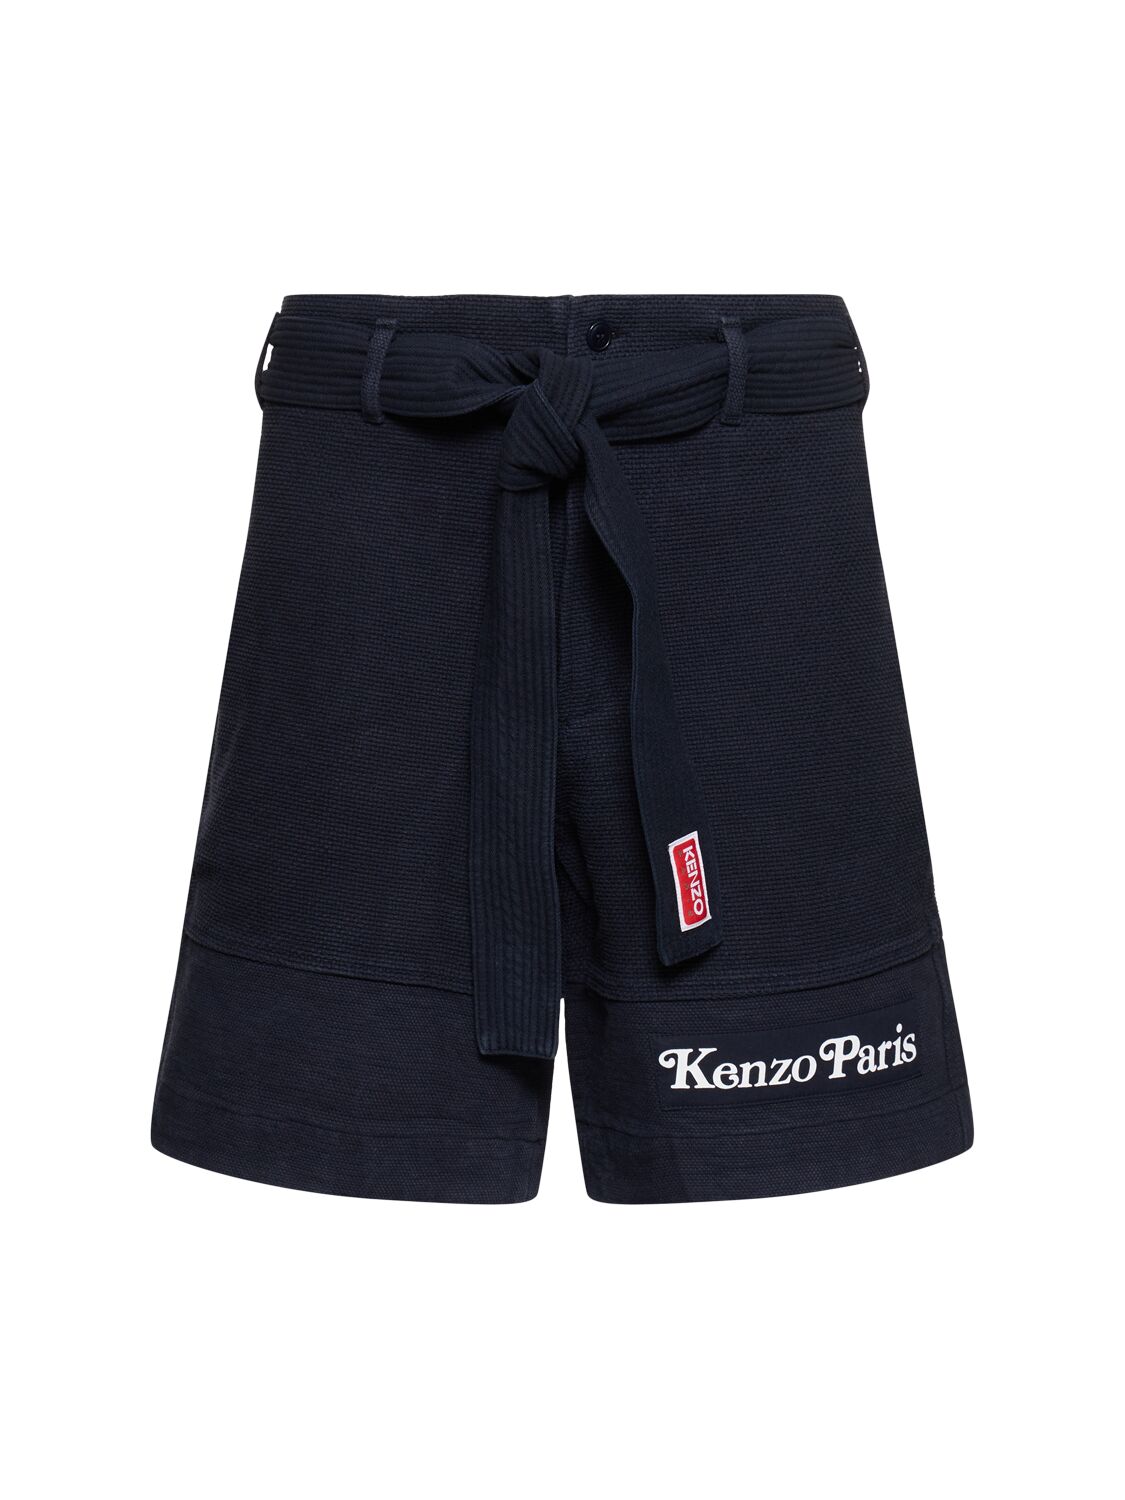 Image of Kenzo By Verdy Woven Cotton Judo Shorts